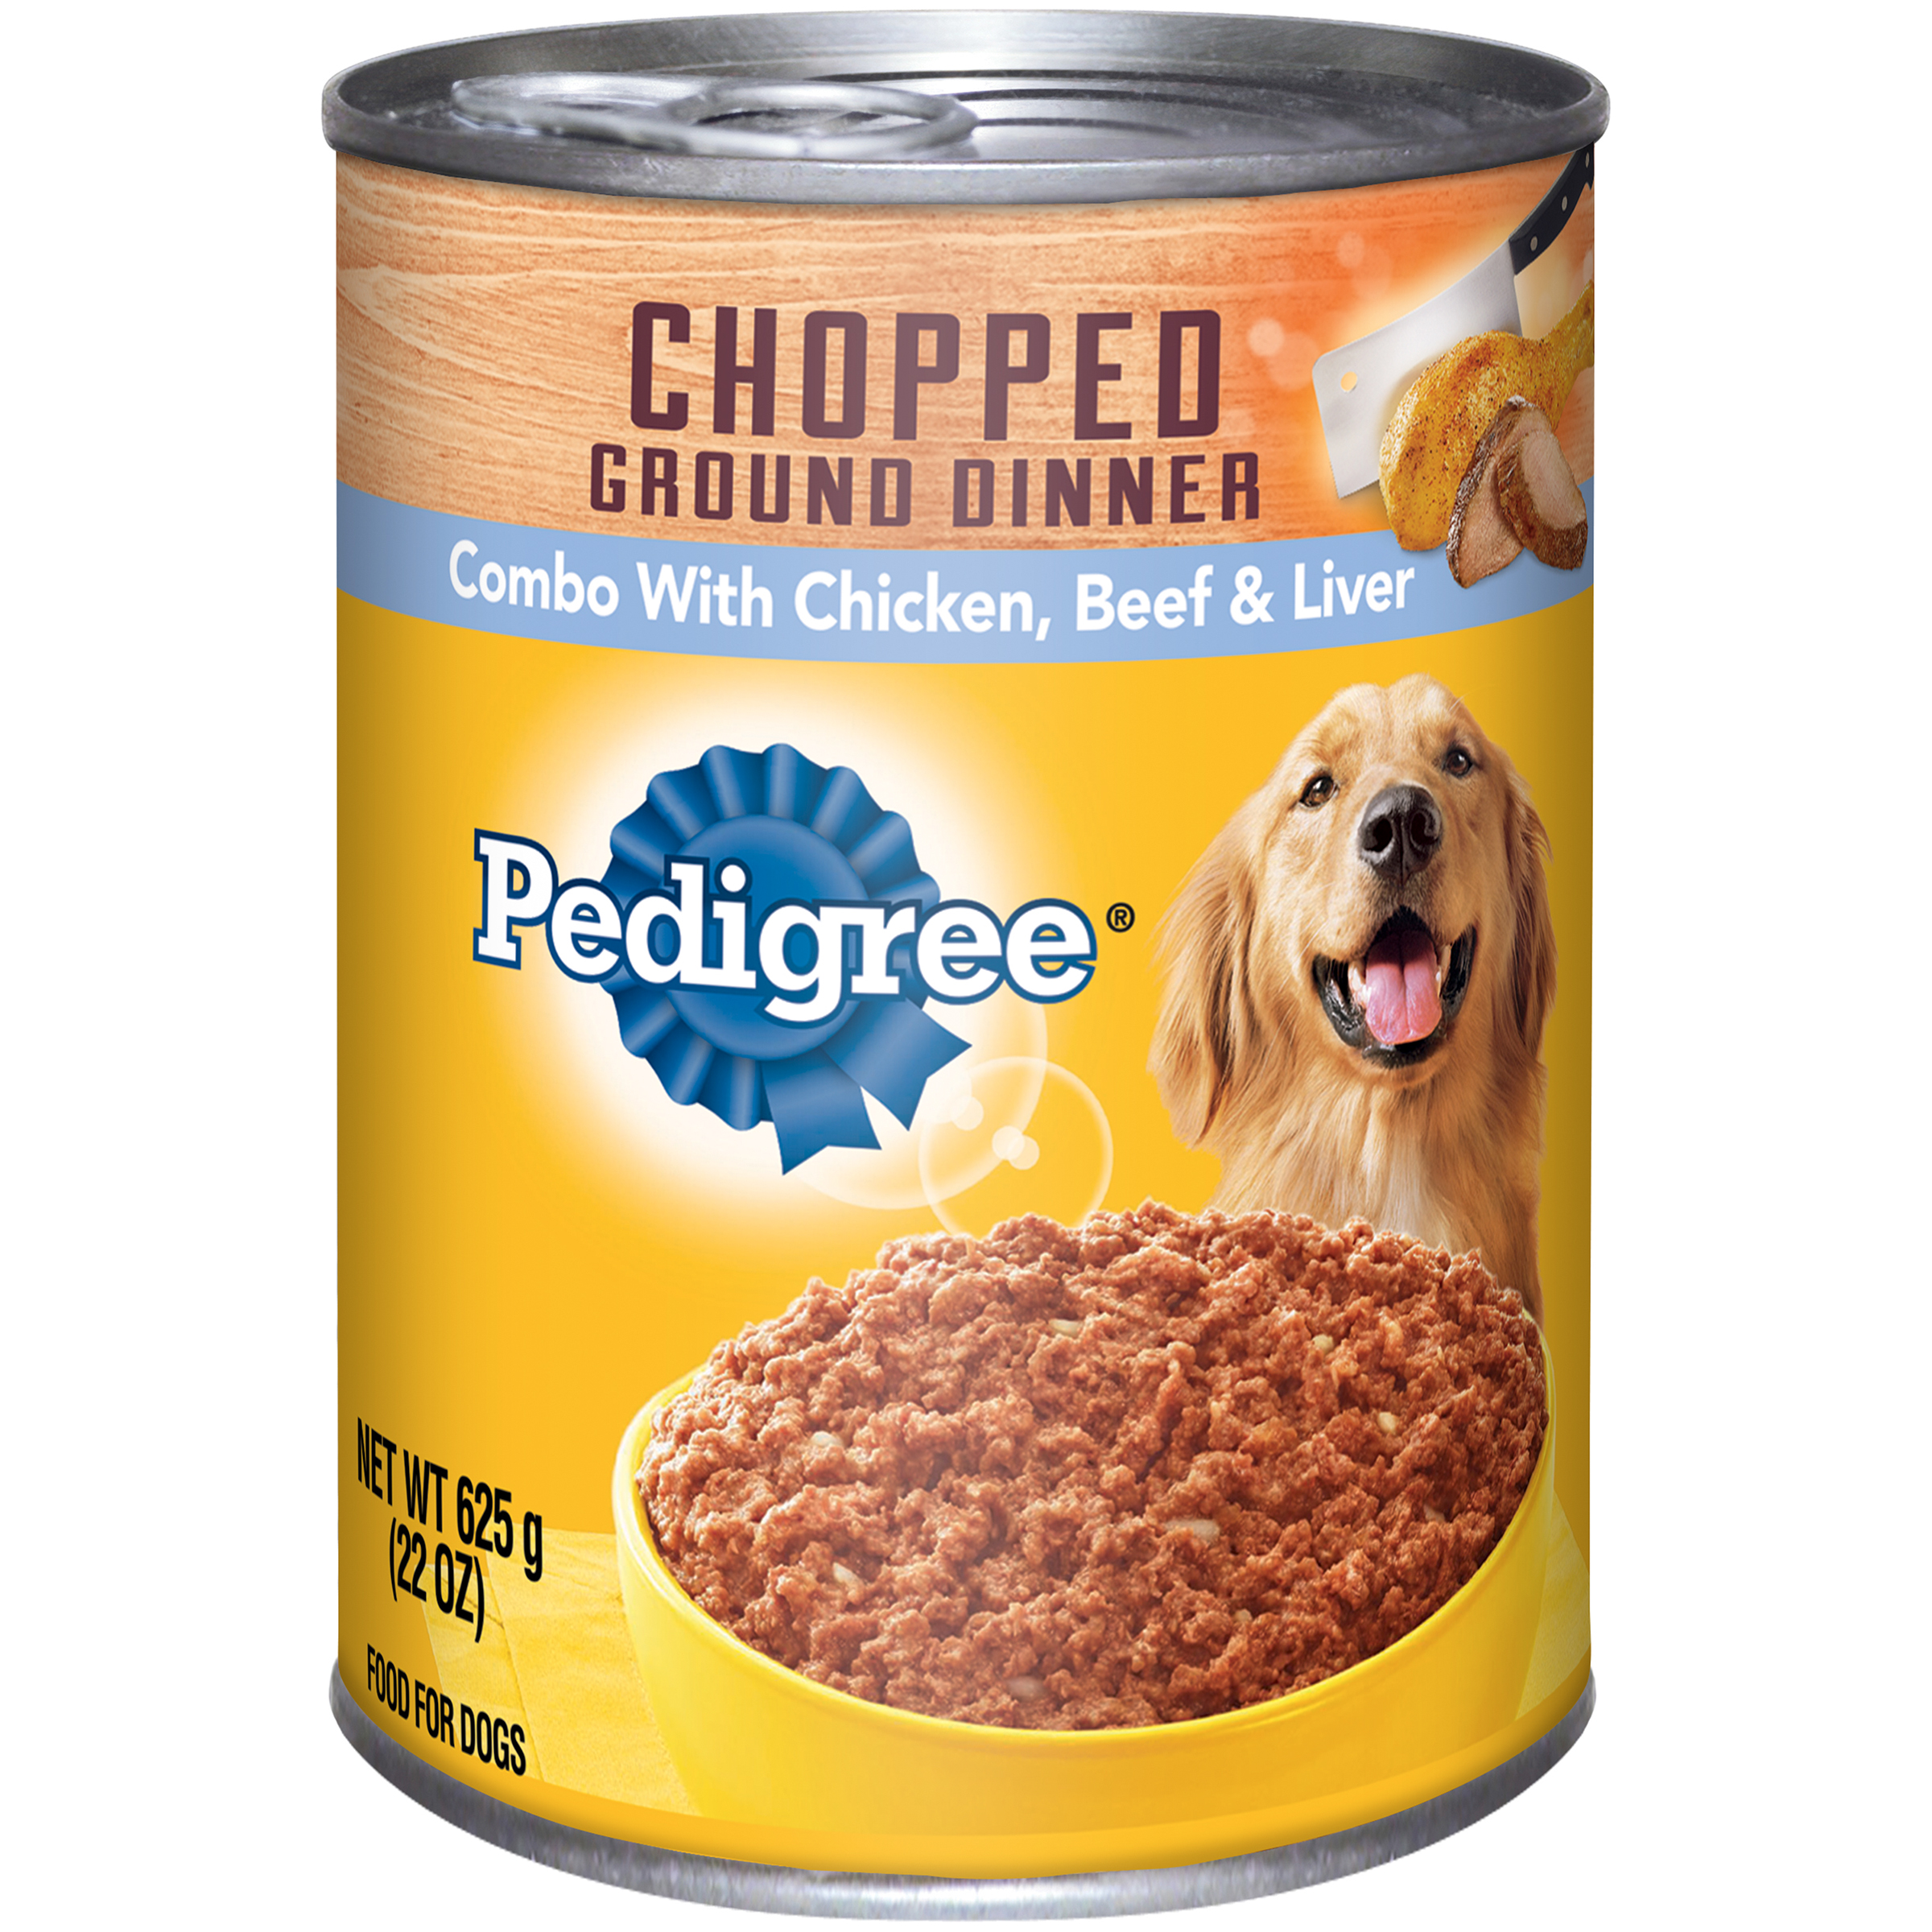 Pedigree Traditional Ground Dinner Moist Dog Food Chopped Combo 22 Ounce Can